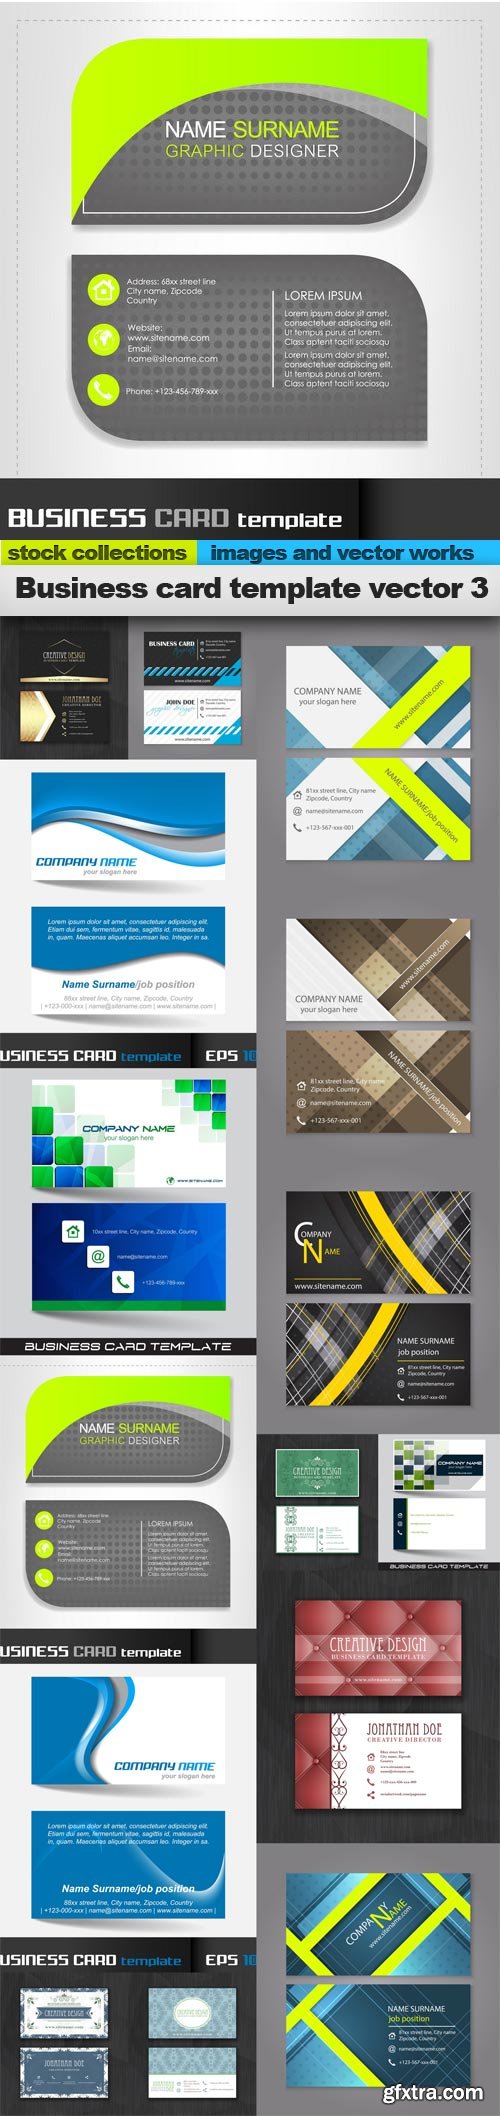 Business card template vector 3, 15 x EPS